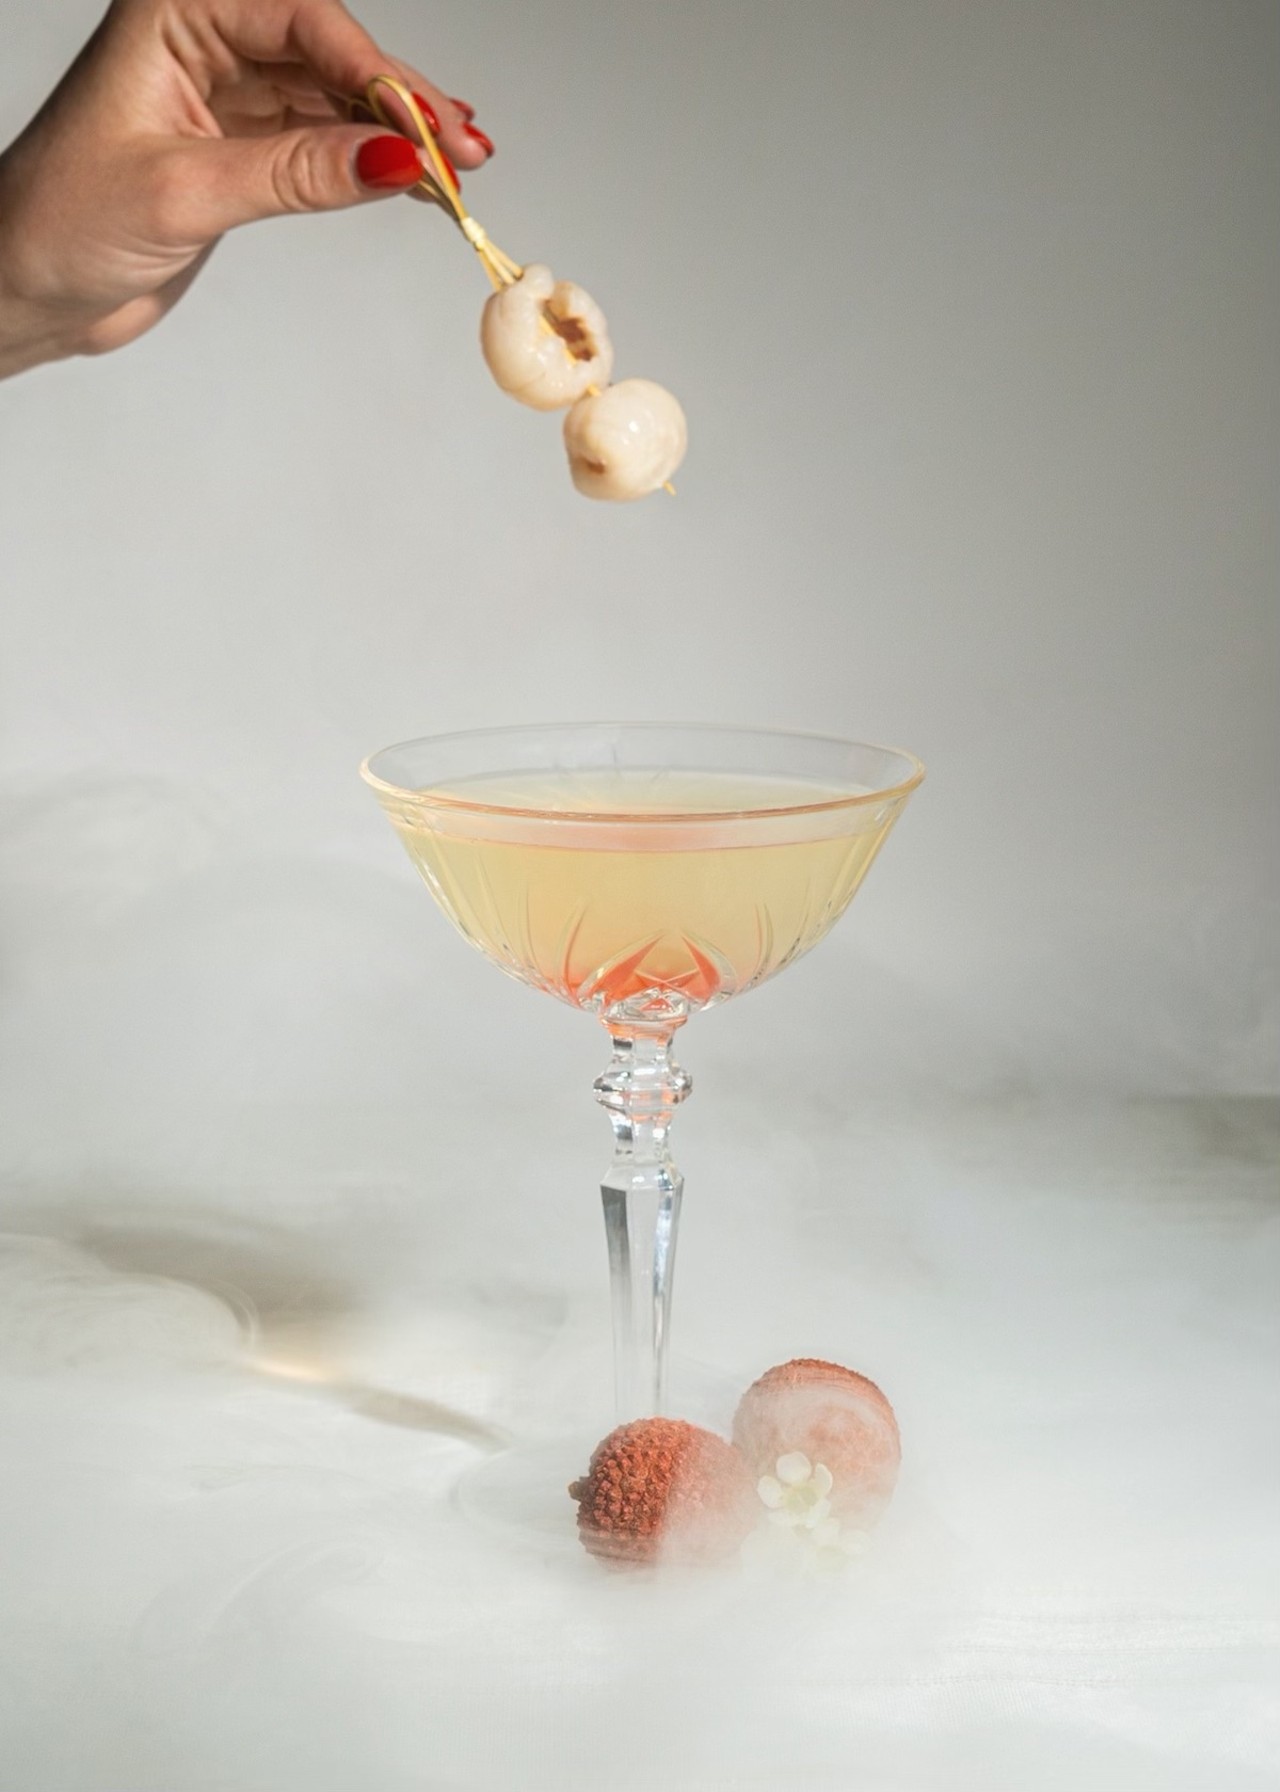 Lychee Martini
What's in it: Vodka, plum wine, lime, lychee simple and popping cherry boba